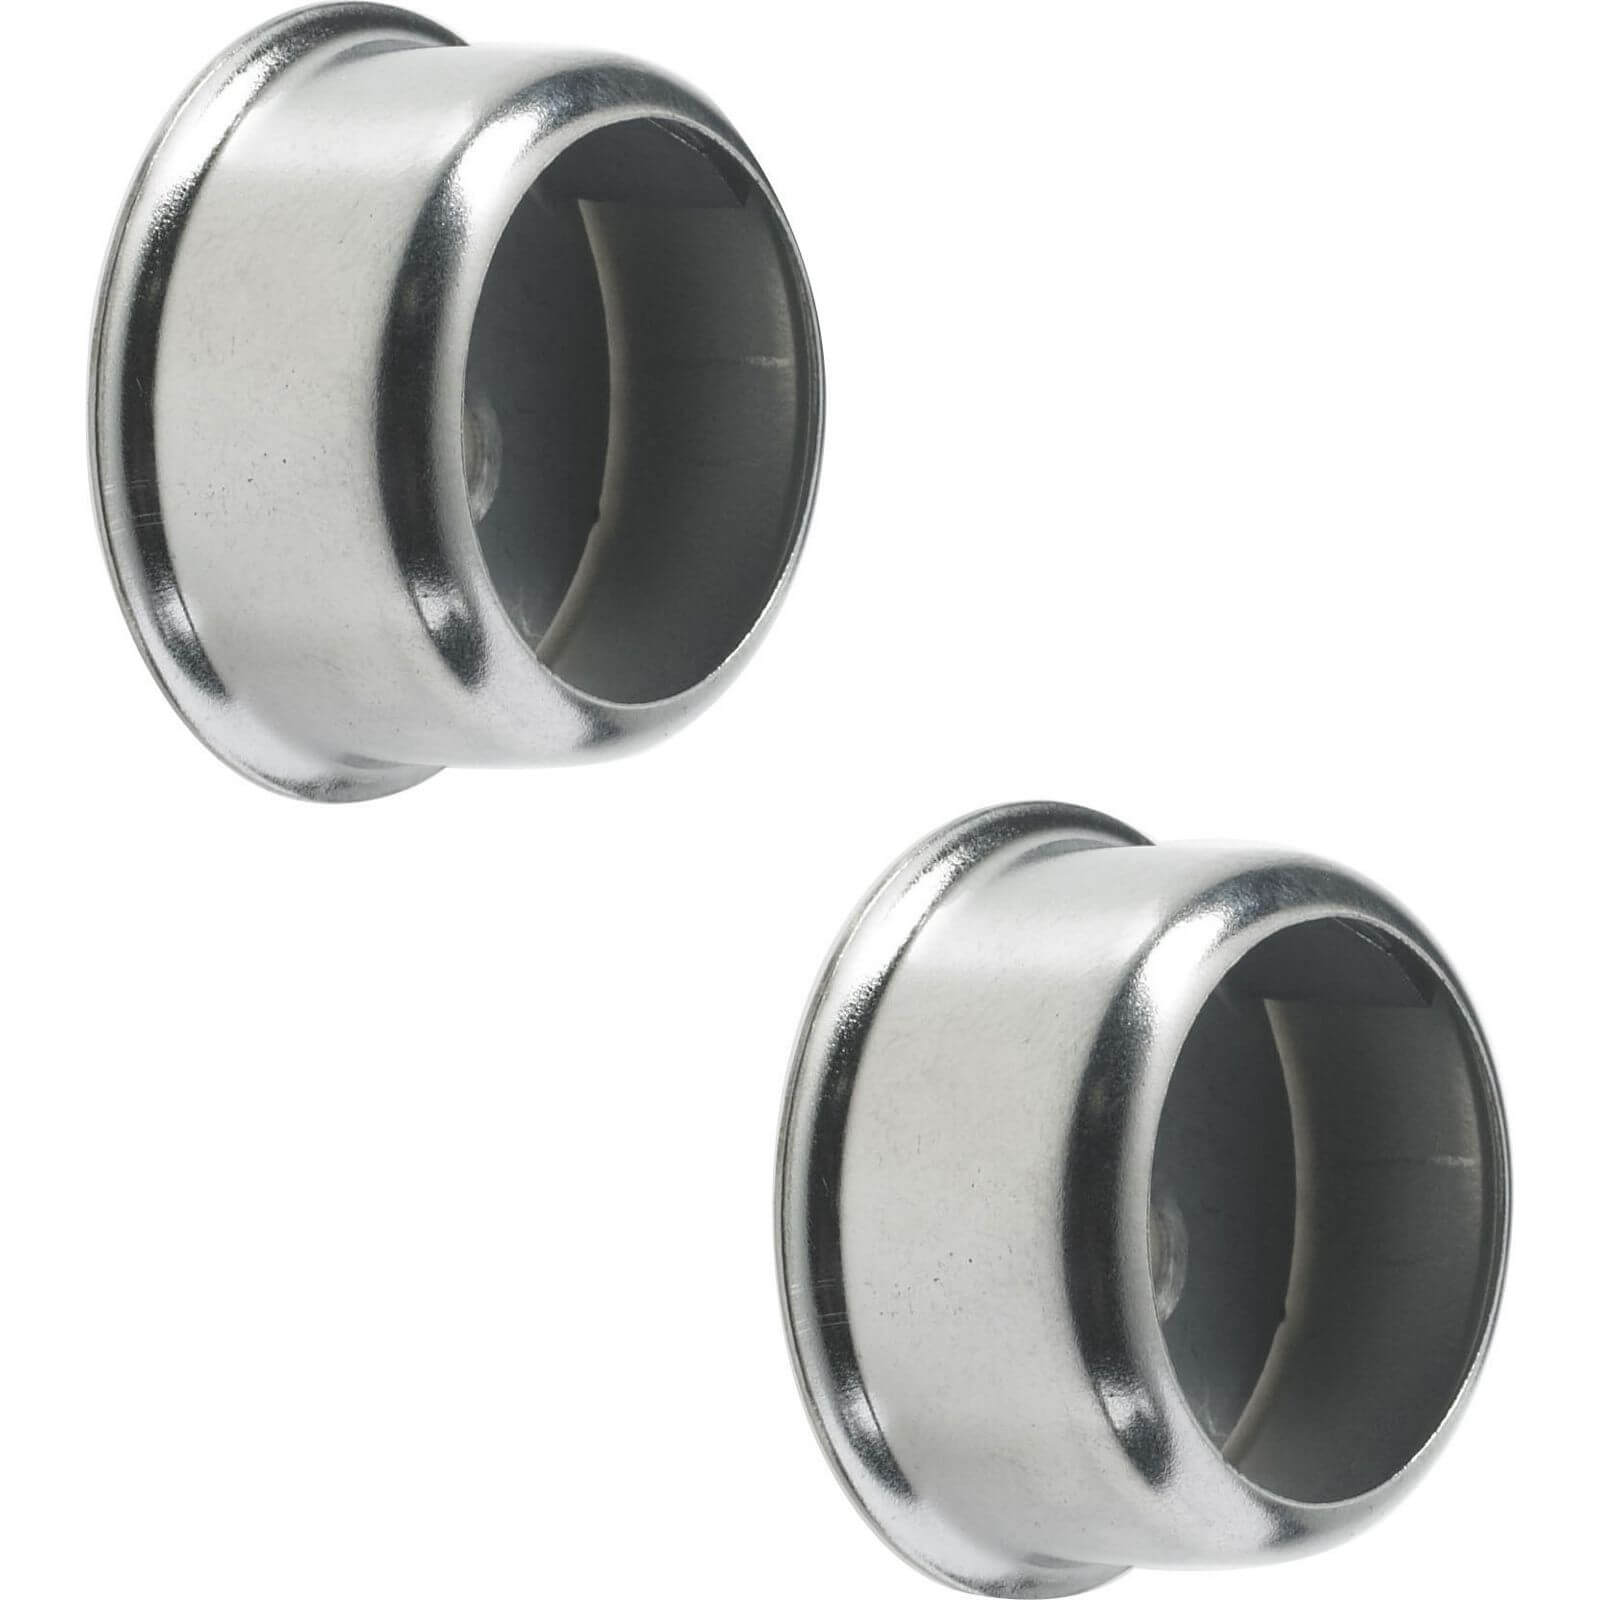 Photo of Invisifix Sockets - Chrome Plated - 25mm